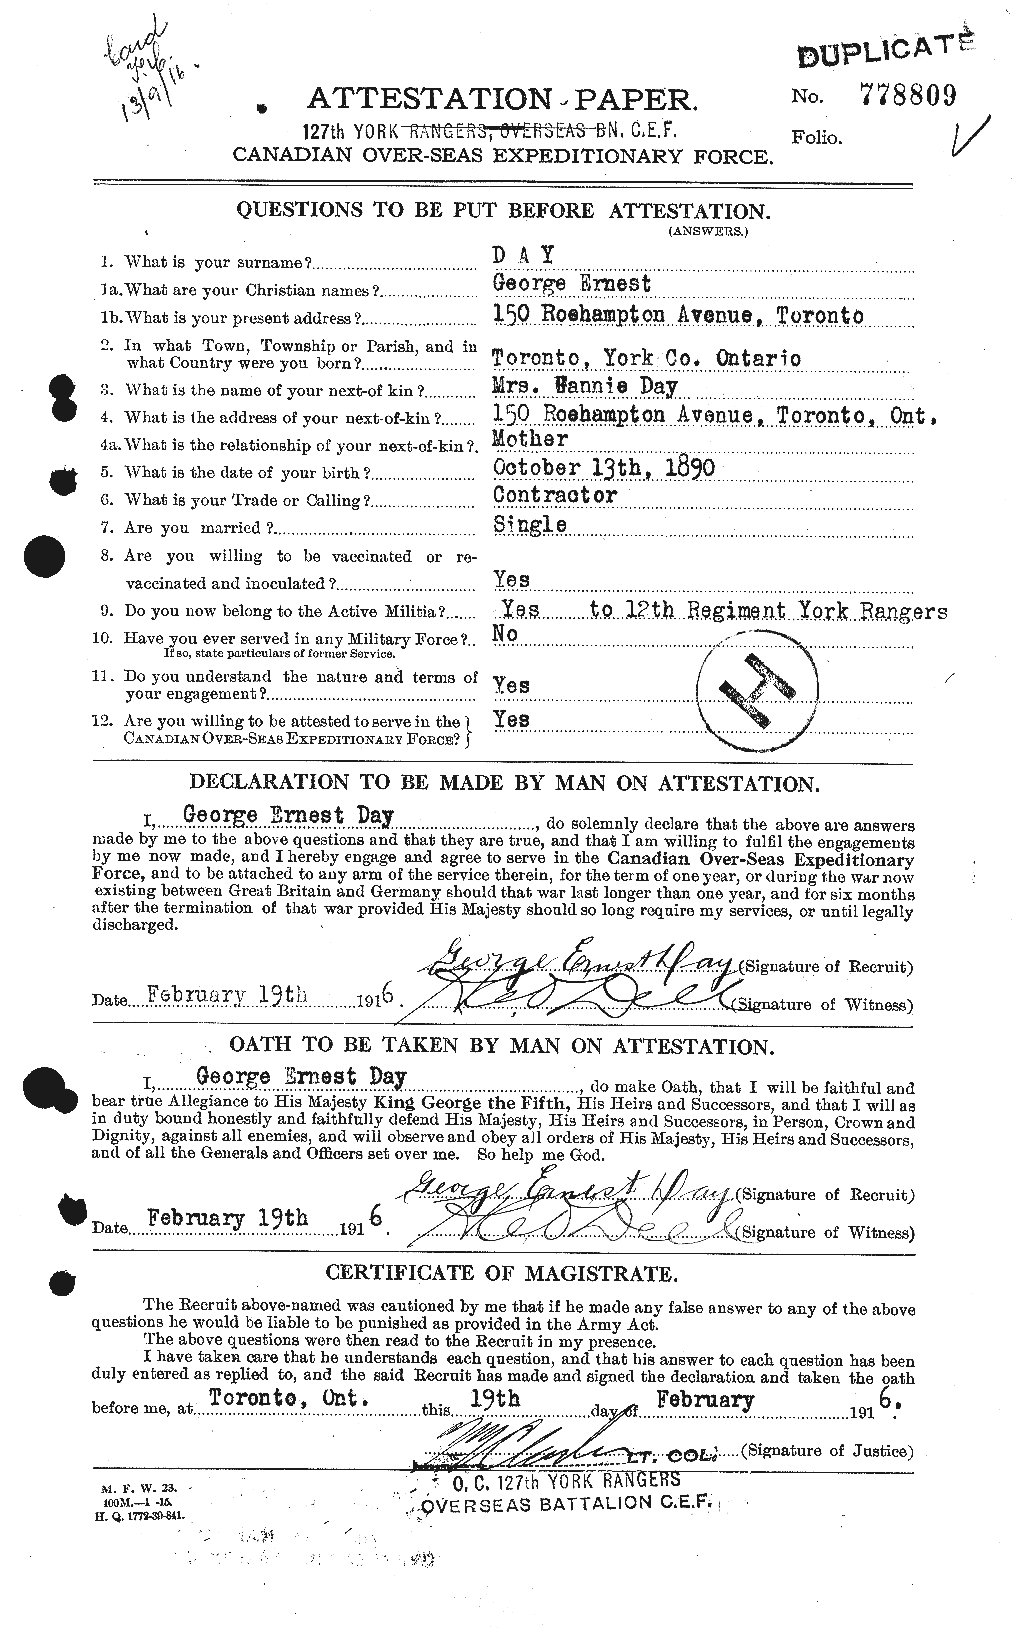 Personnel Records of the First World War - CEF 283079a